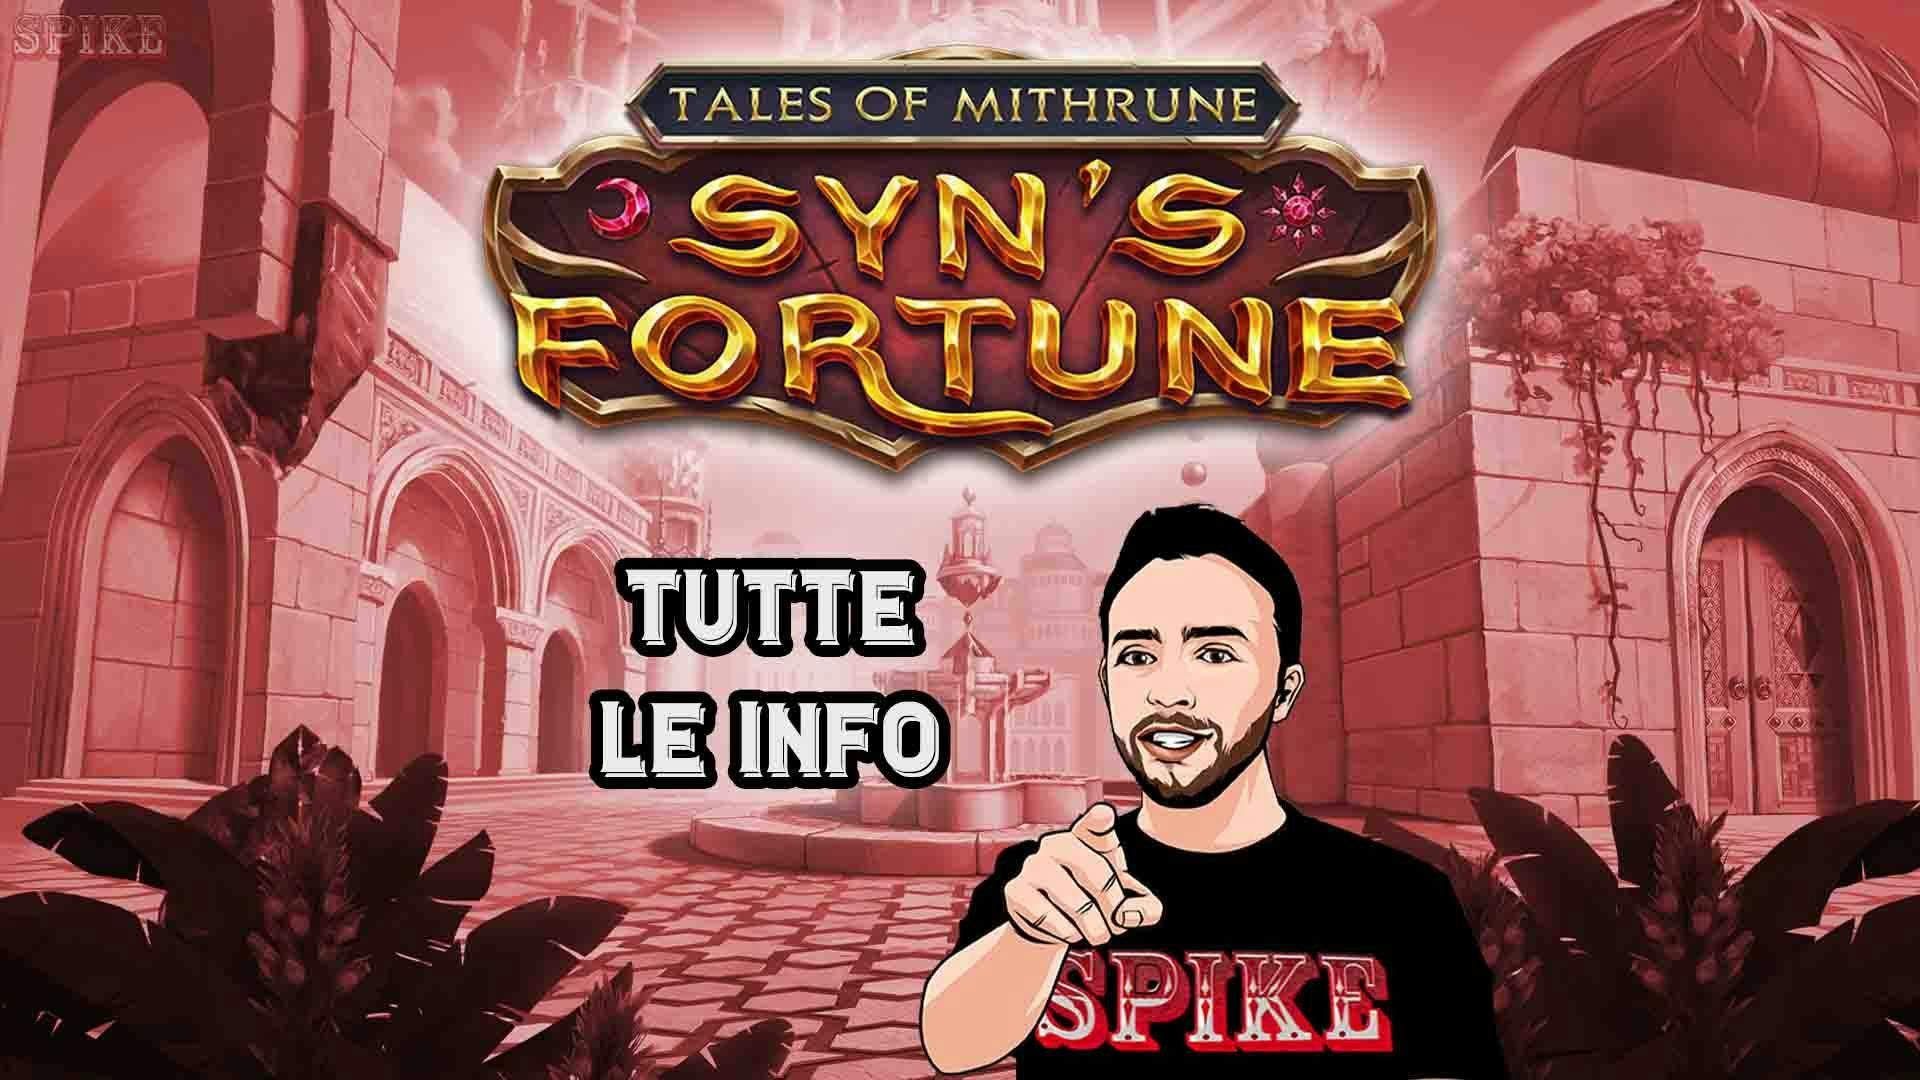  Tales of Mithrune Syn's Fortune Nuova Slot